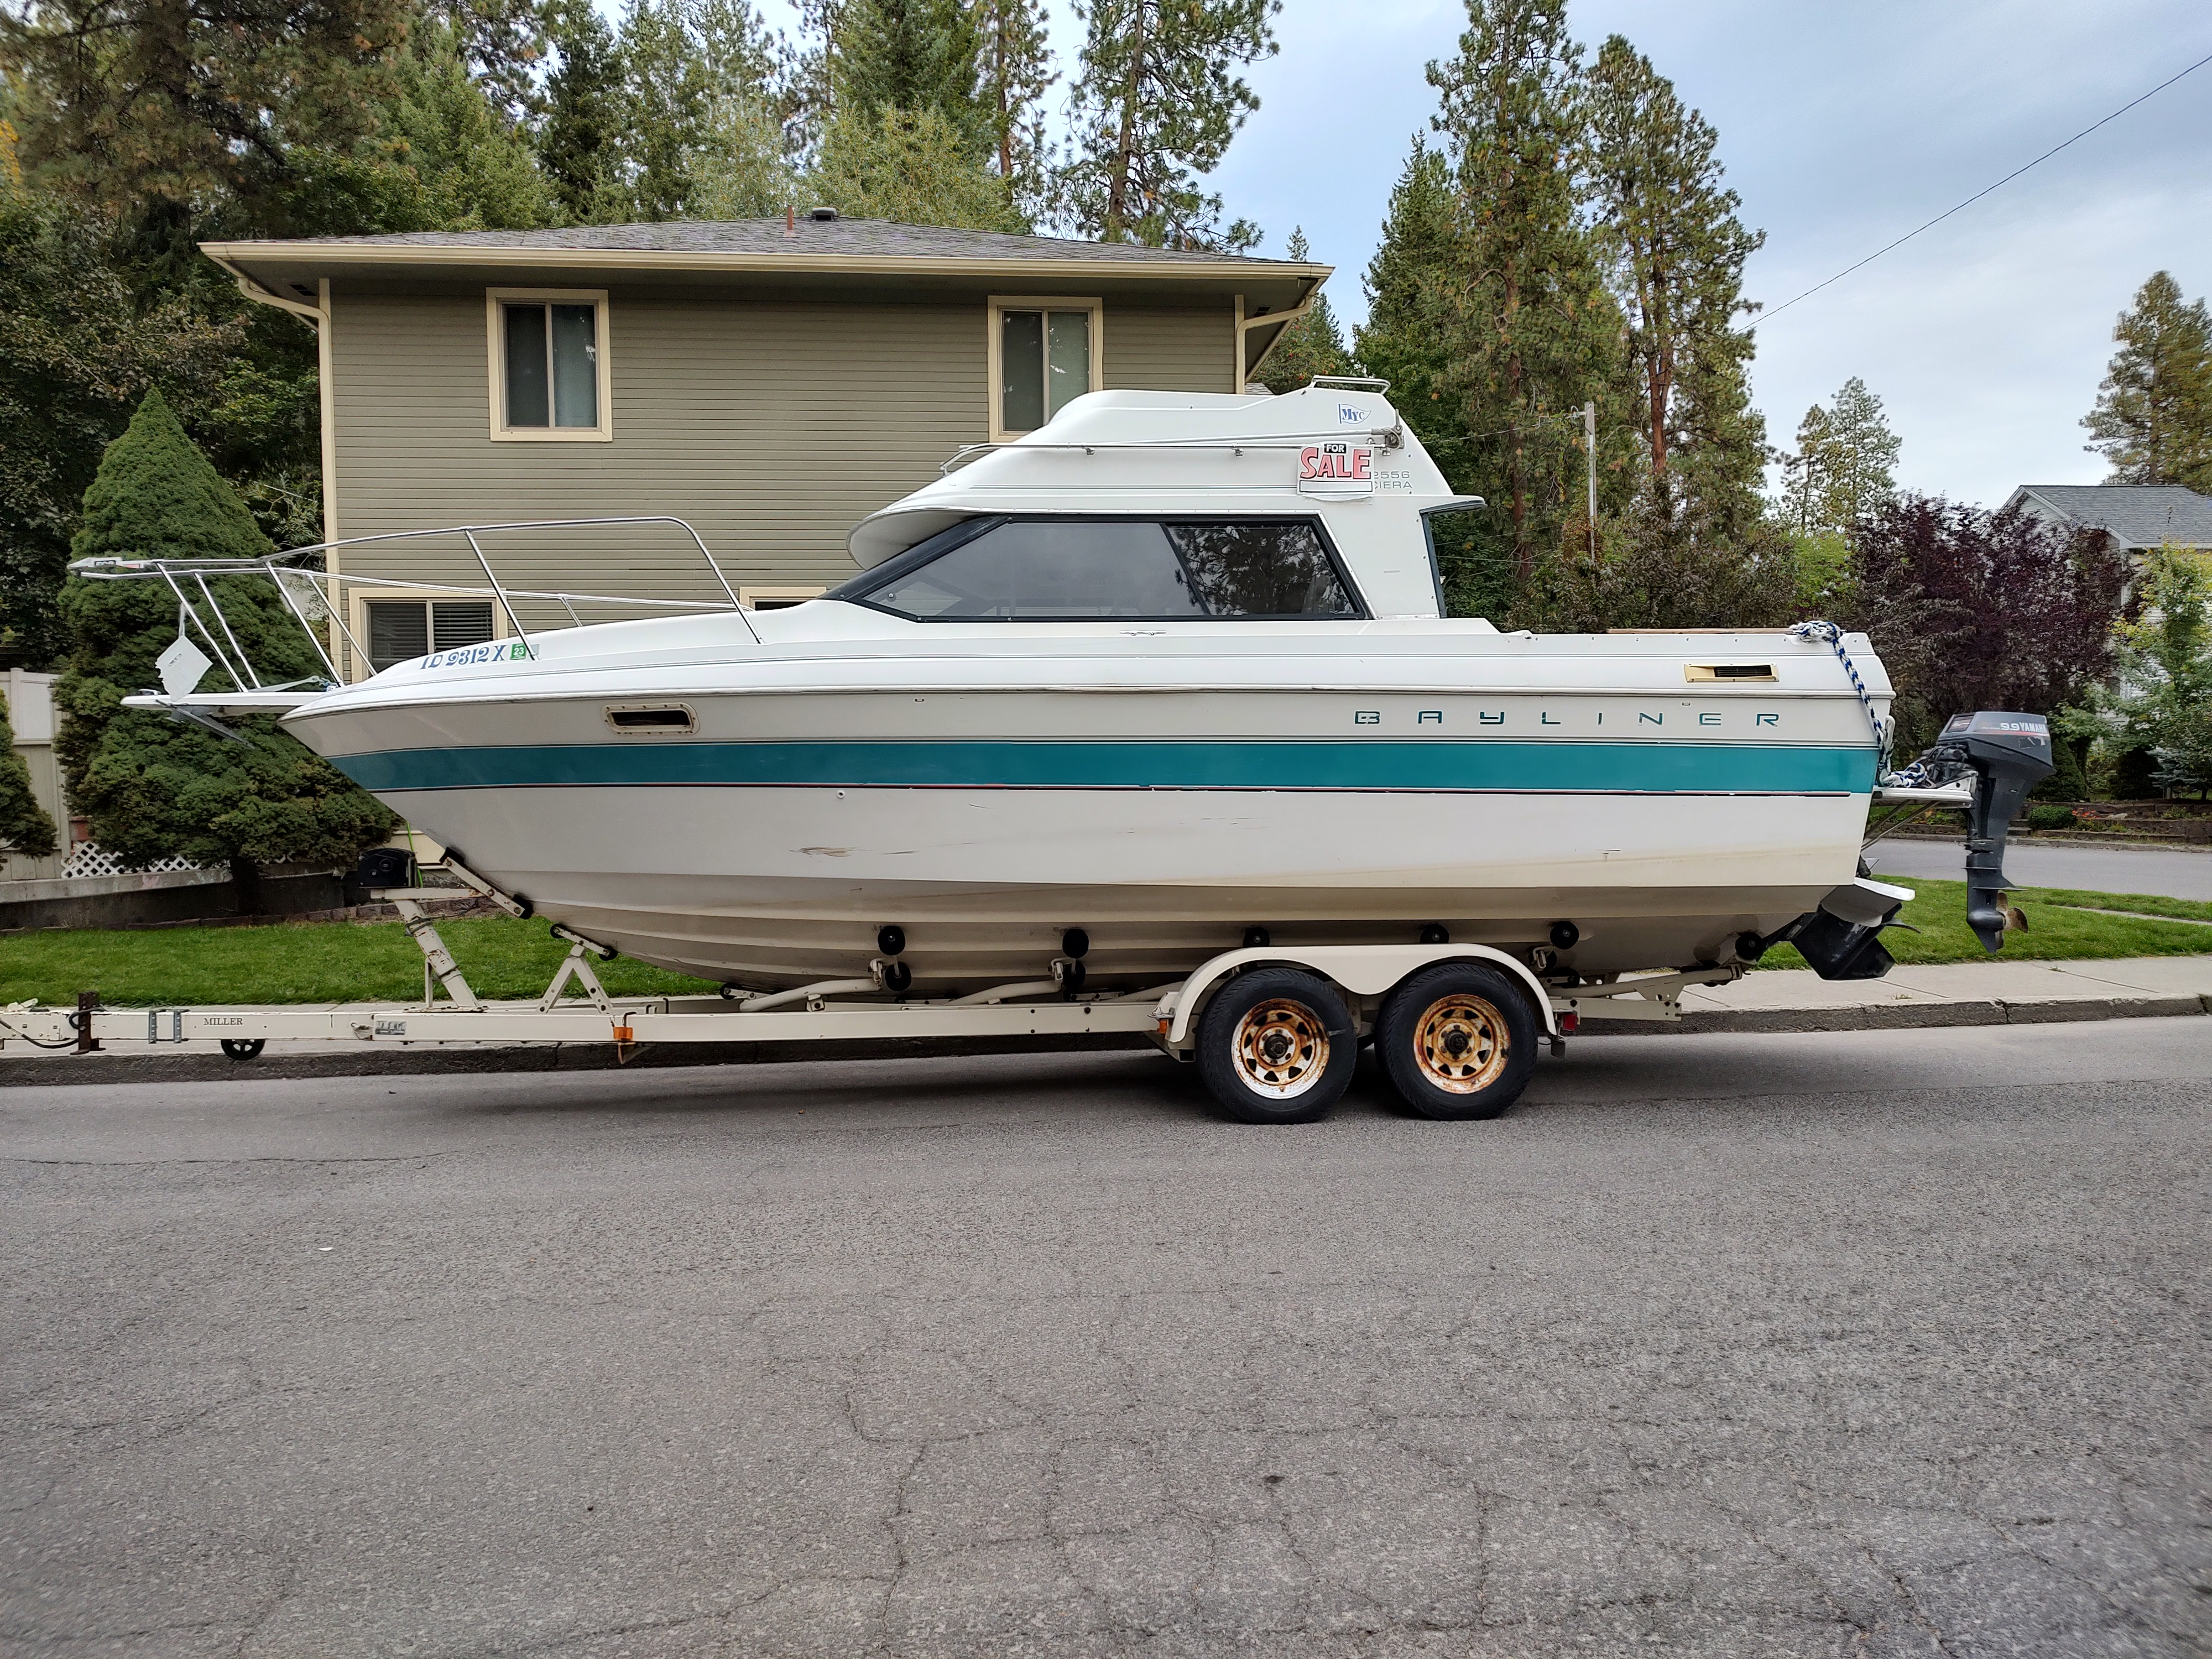 Room For Kids '93, 25'  Room For Kids '93, 25' Bayliner Cabin Cruiser Great family boat and easy to maneuver. Sleeps 4, Mercruiser motor. Currently moored at Blackwell across from Cedars. Needs some TLC. $15,000 208-661-3001